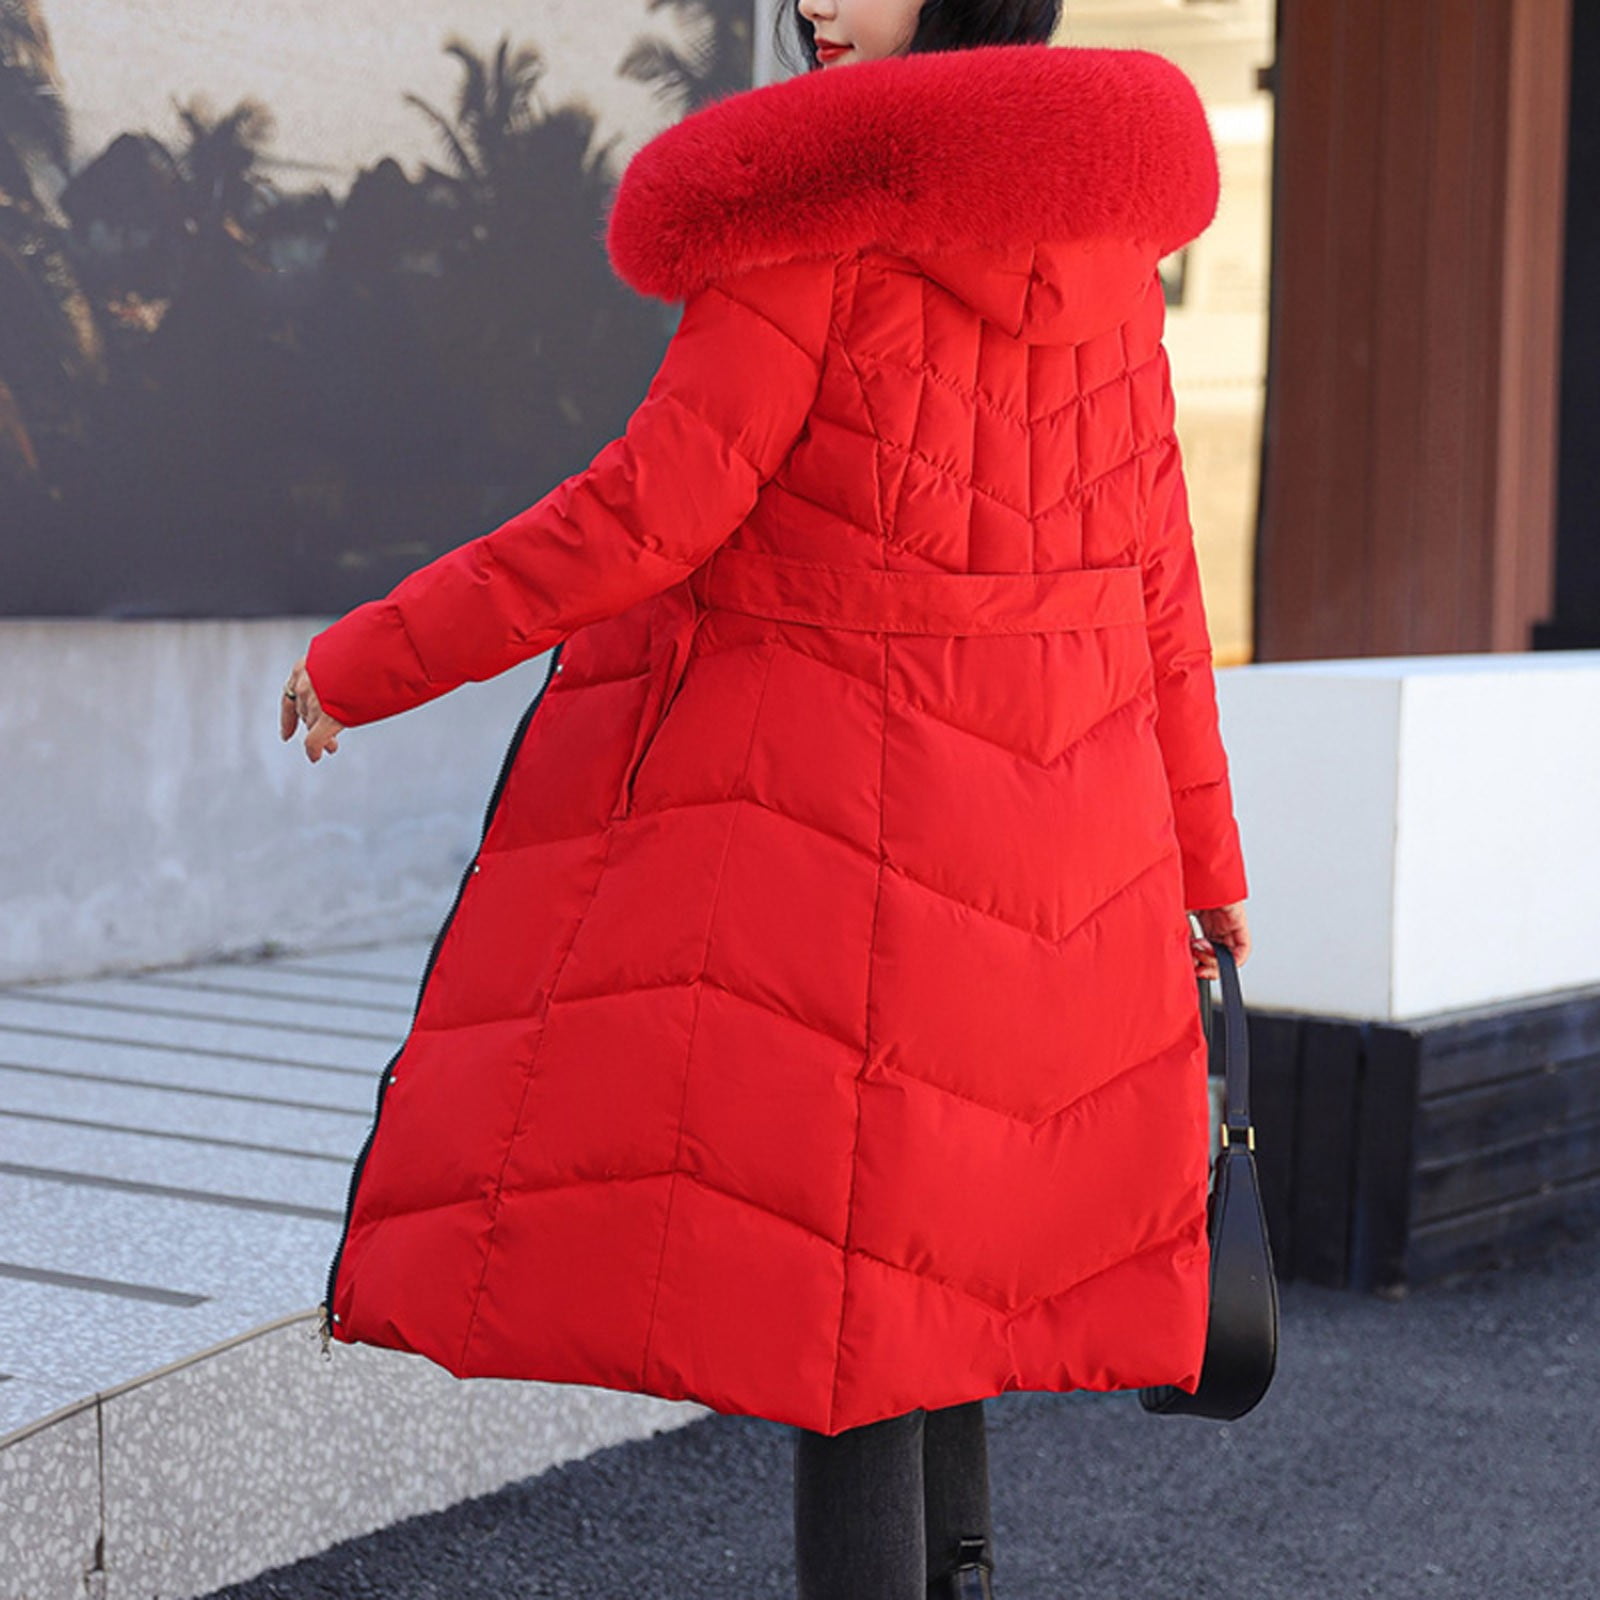 Aayomet Coats For Women Winter Womens Fashion Horn Button Thicken Coat with  Hood Winter Warm Jacket,Red L